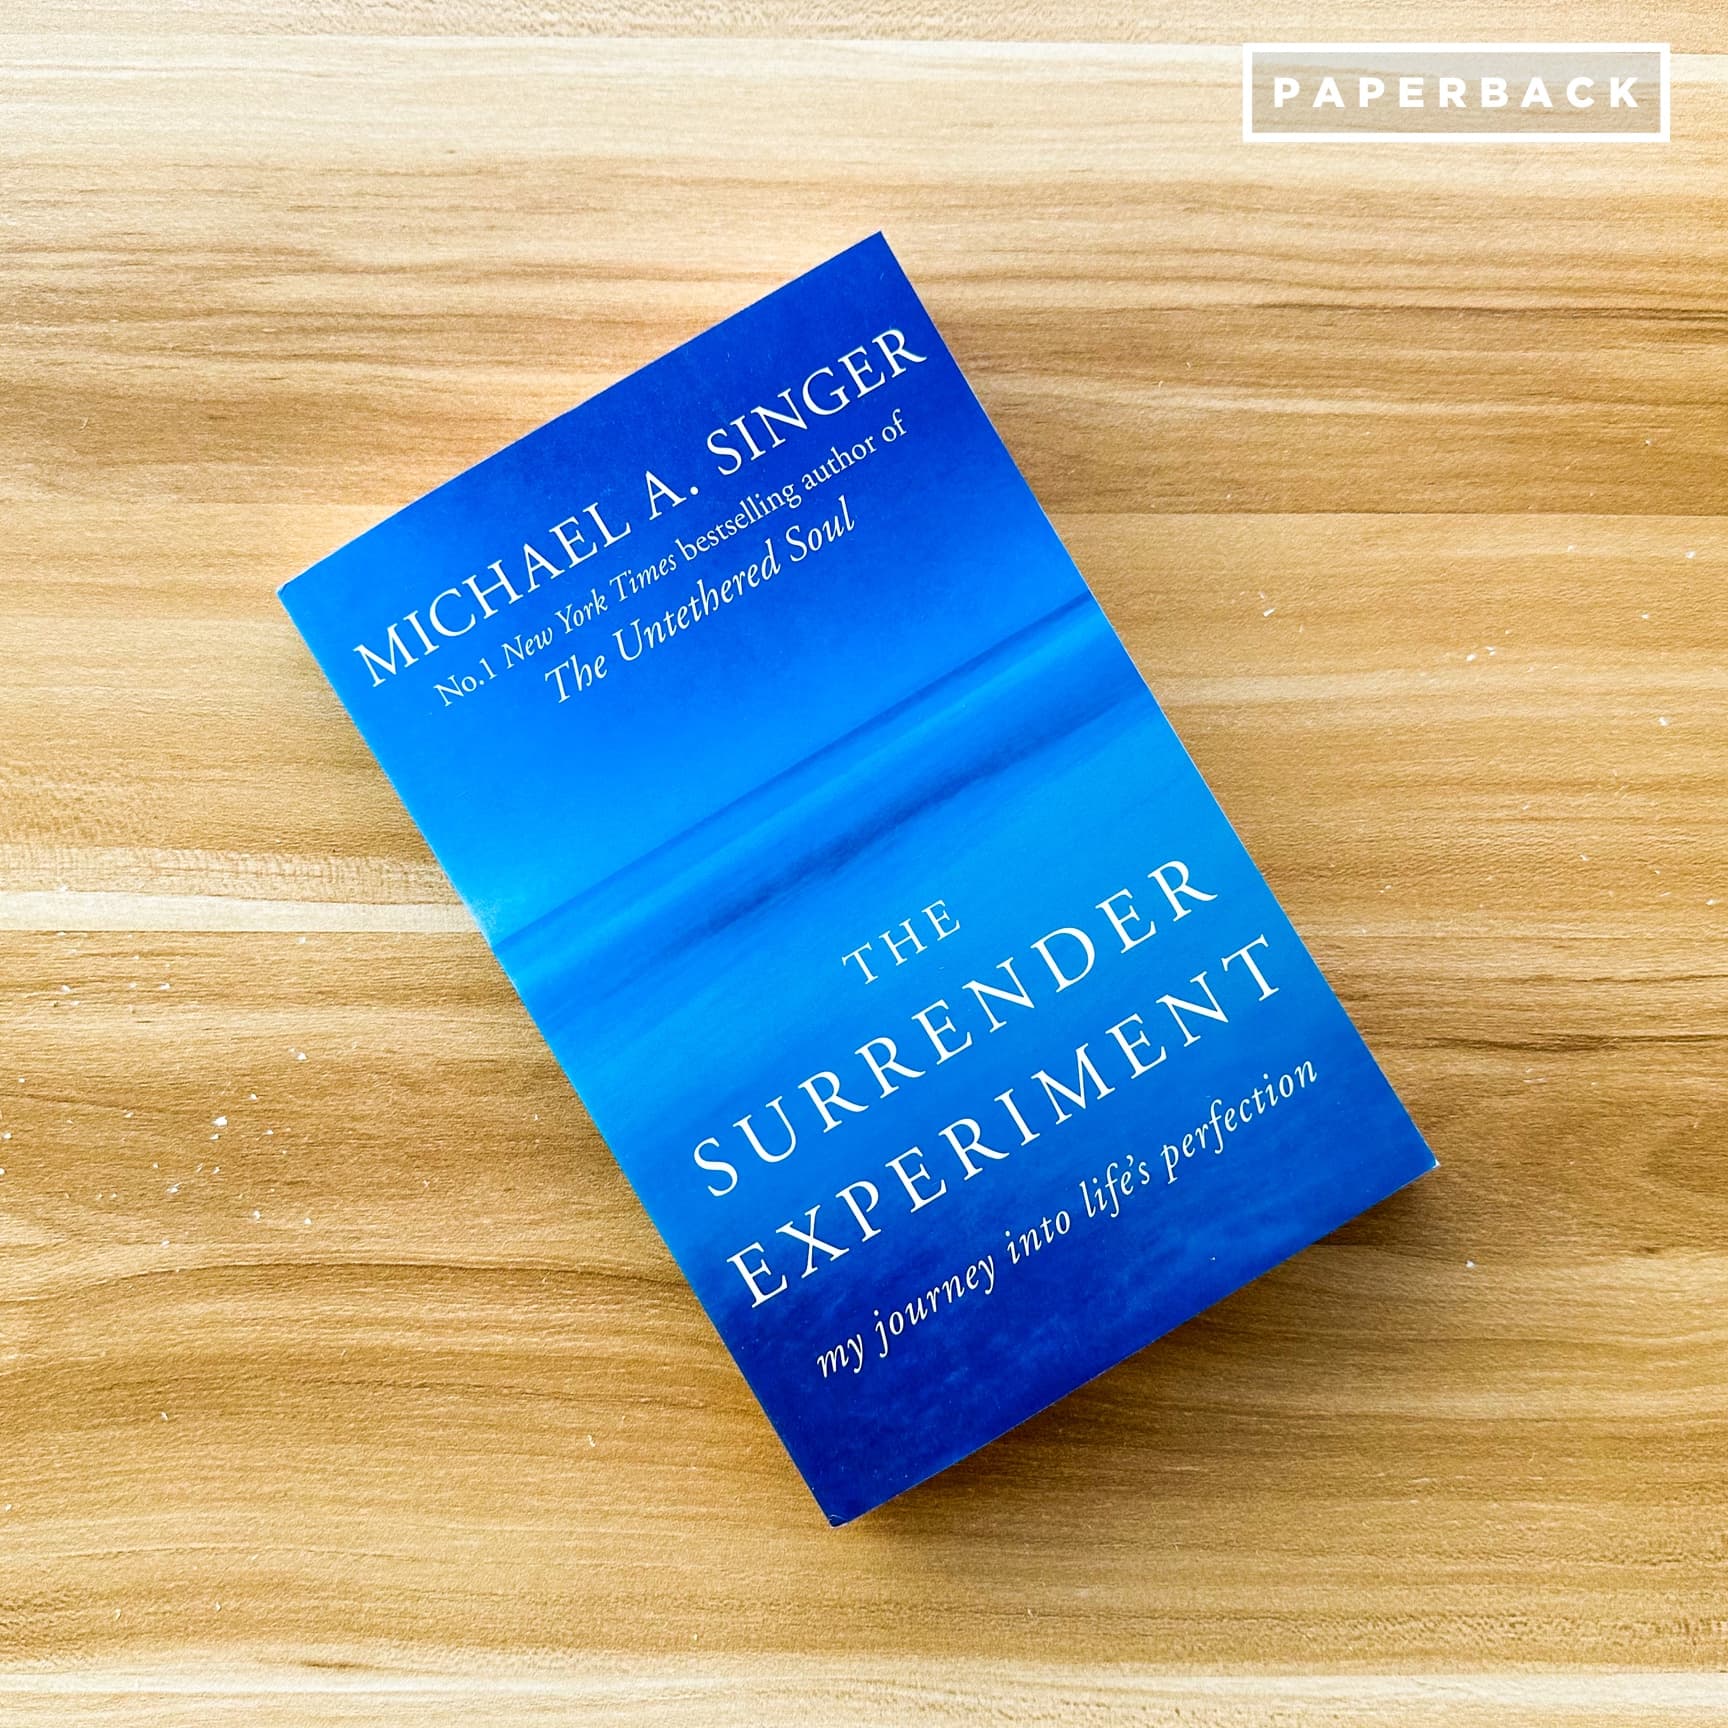 Gregory　Books　Philippines　The　Experiment　the　in　–　Buy　Surrender